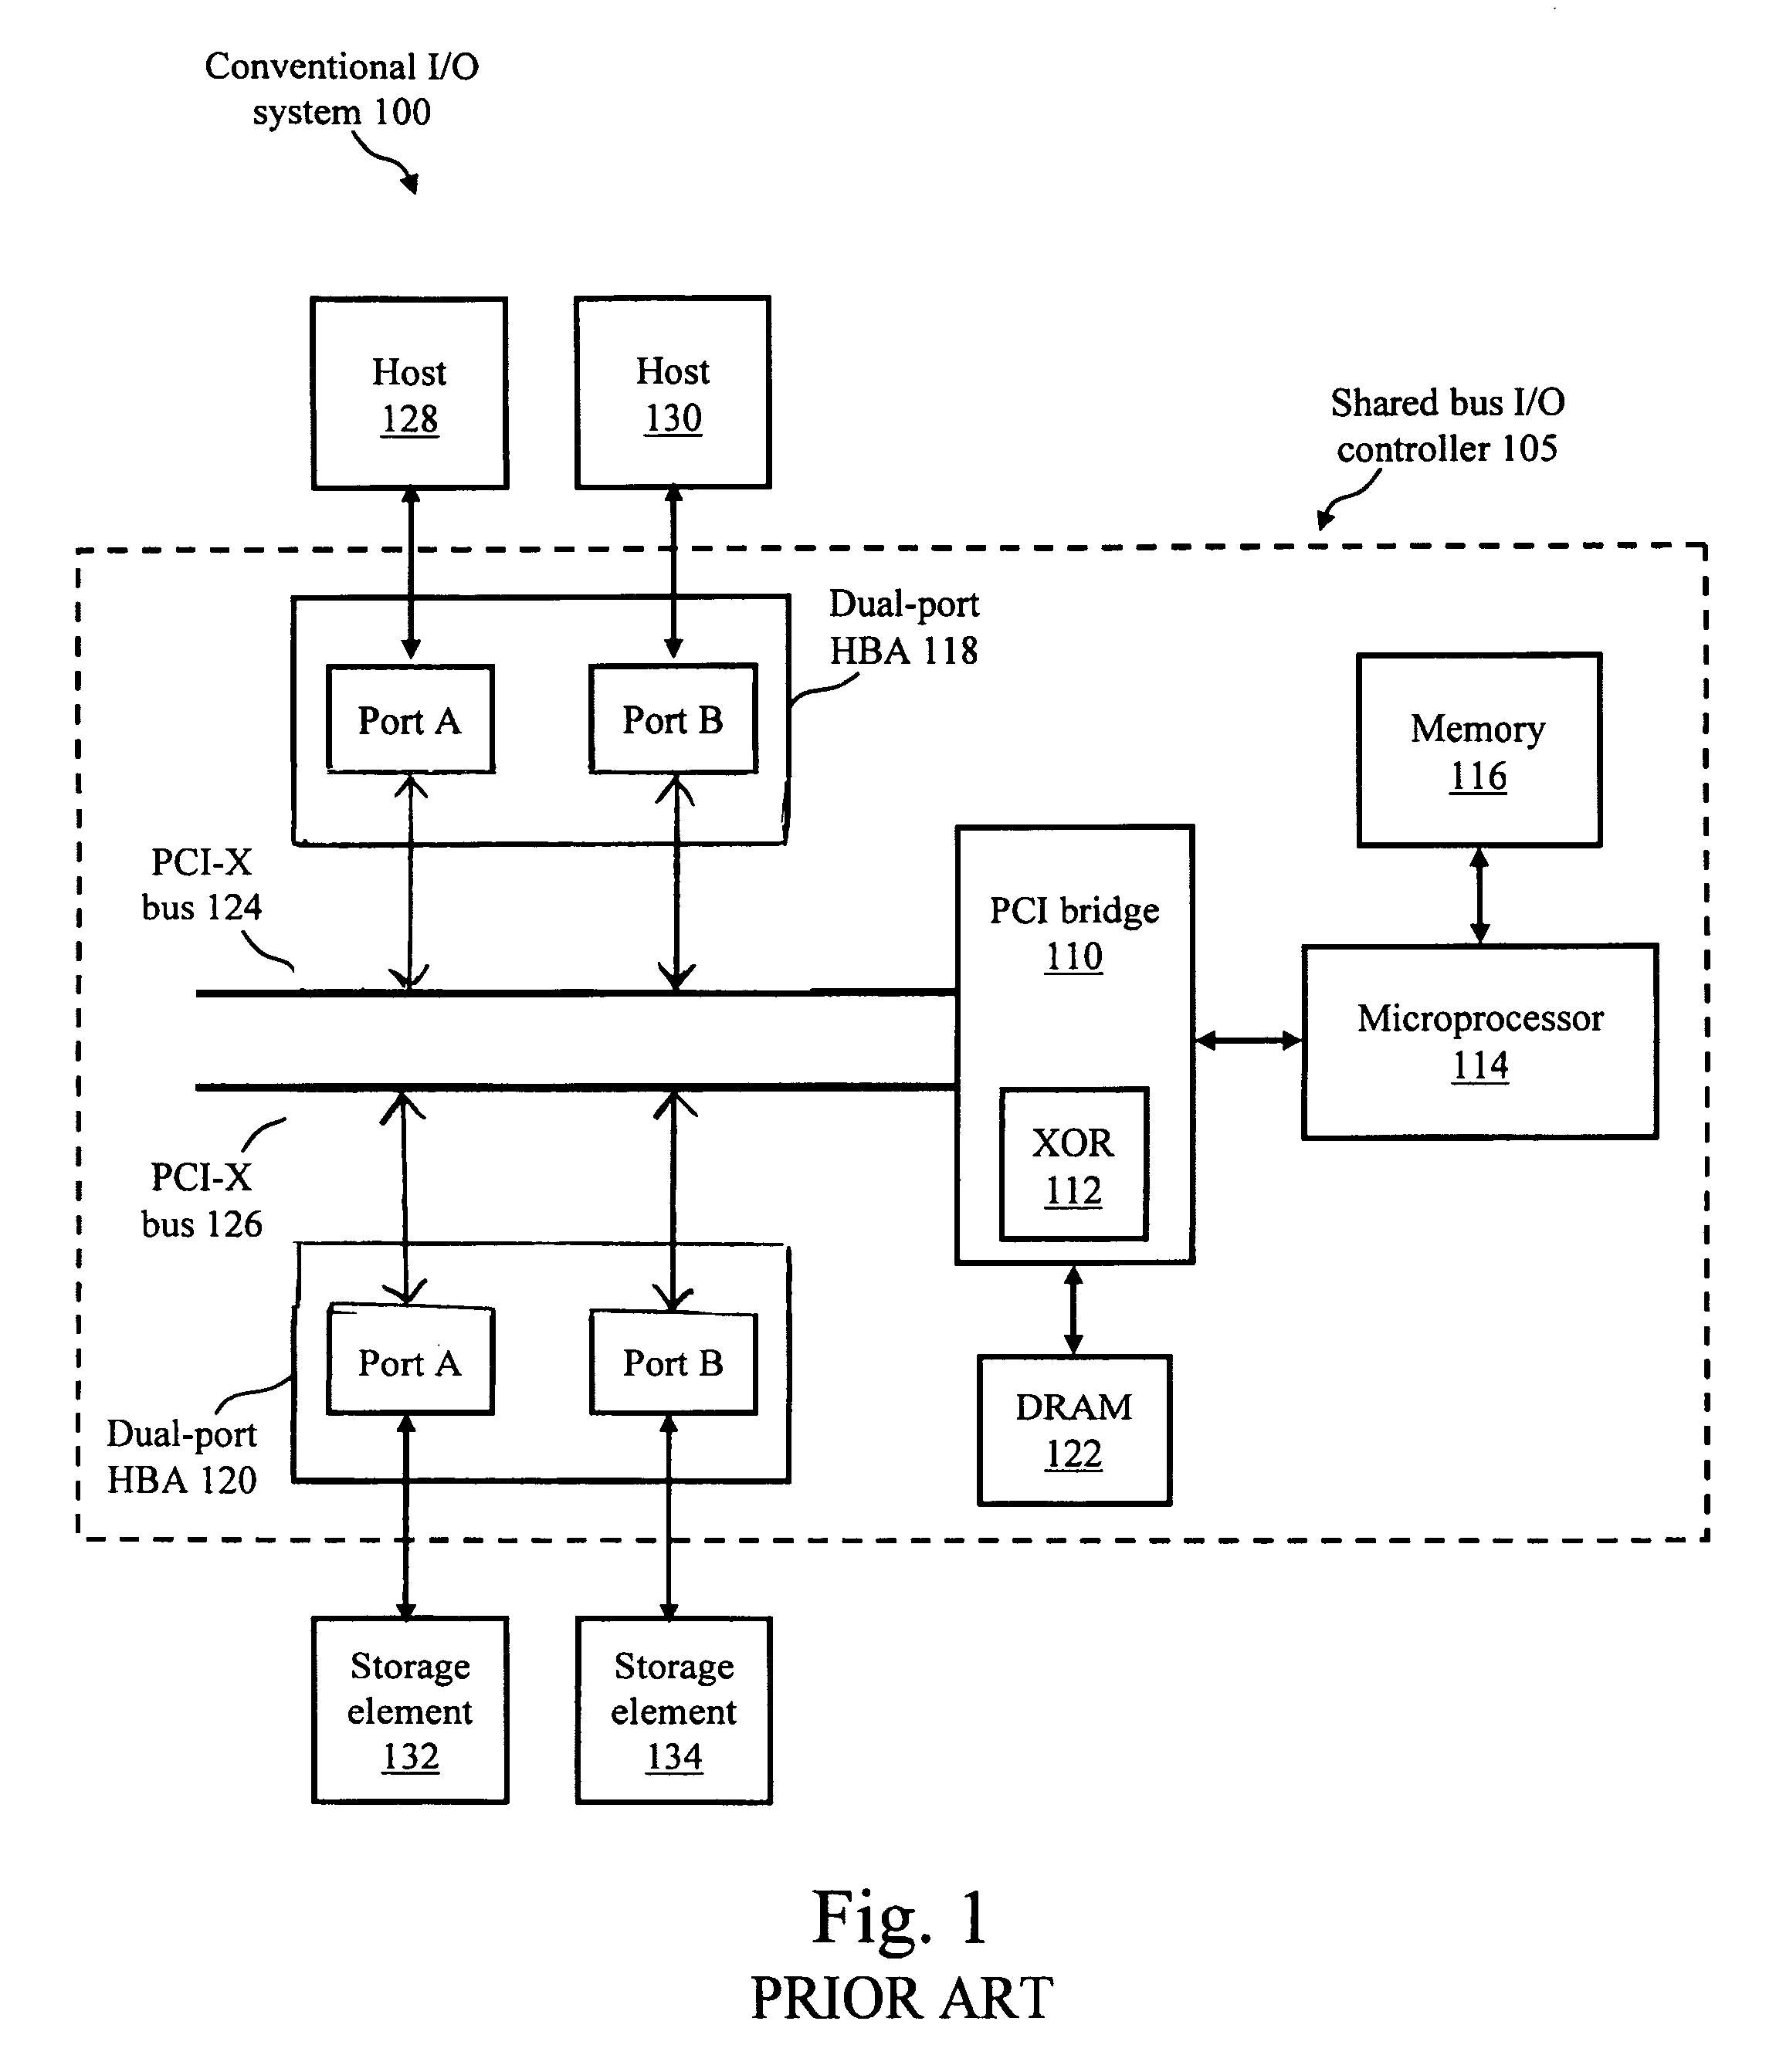 High-speed I/O controller having separate control and data paths